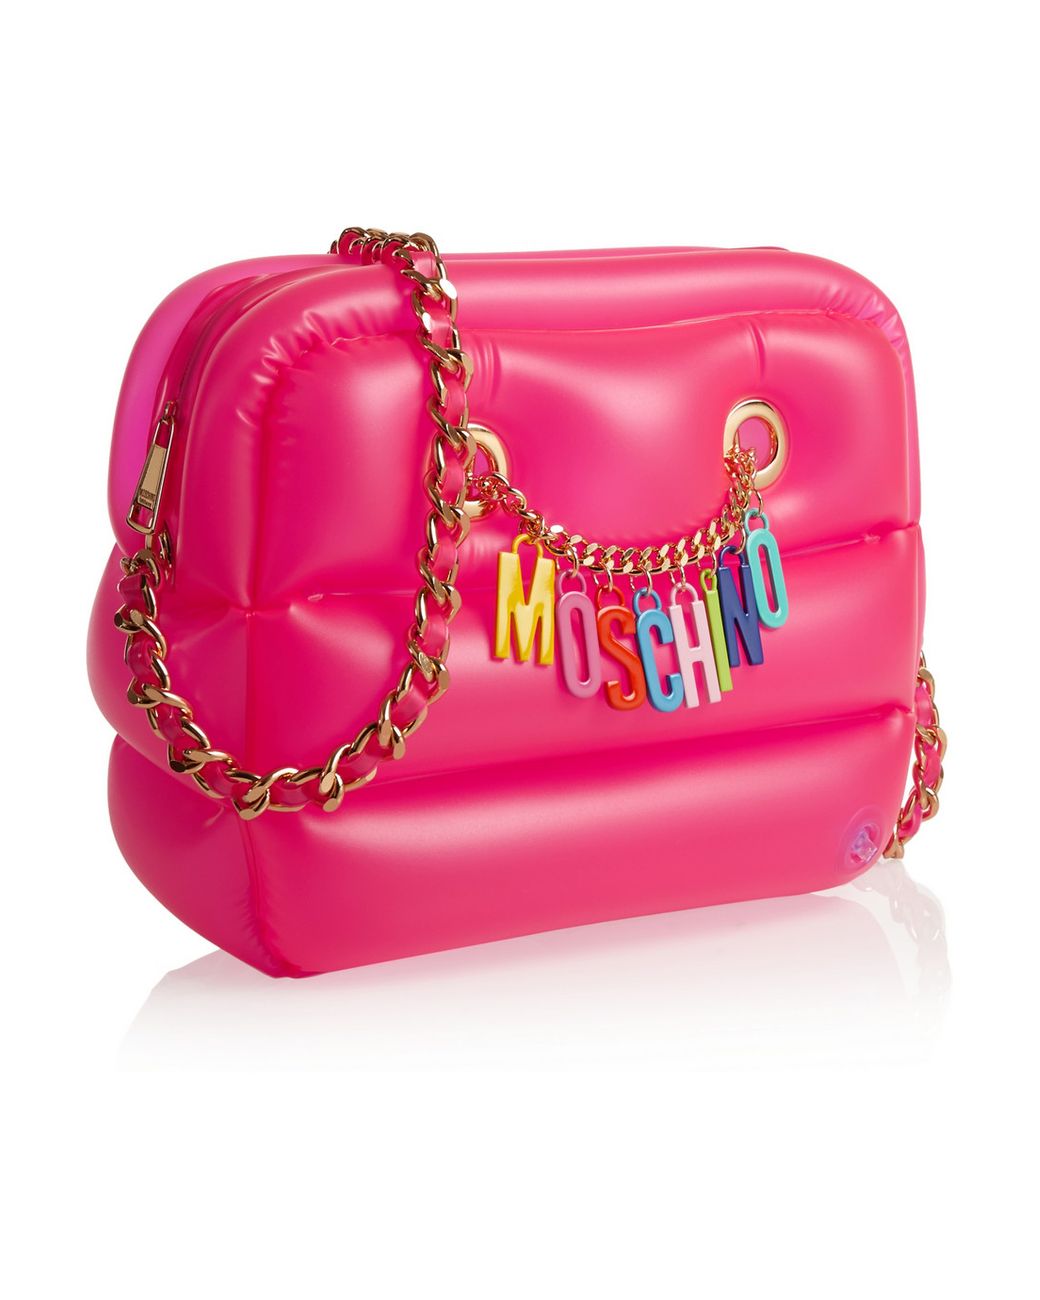 Moschino Shoulder Bag in Pink | Lyst